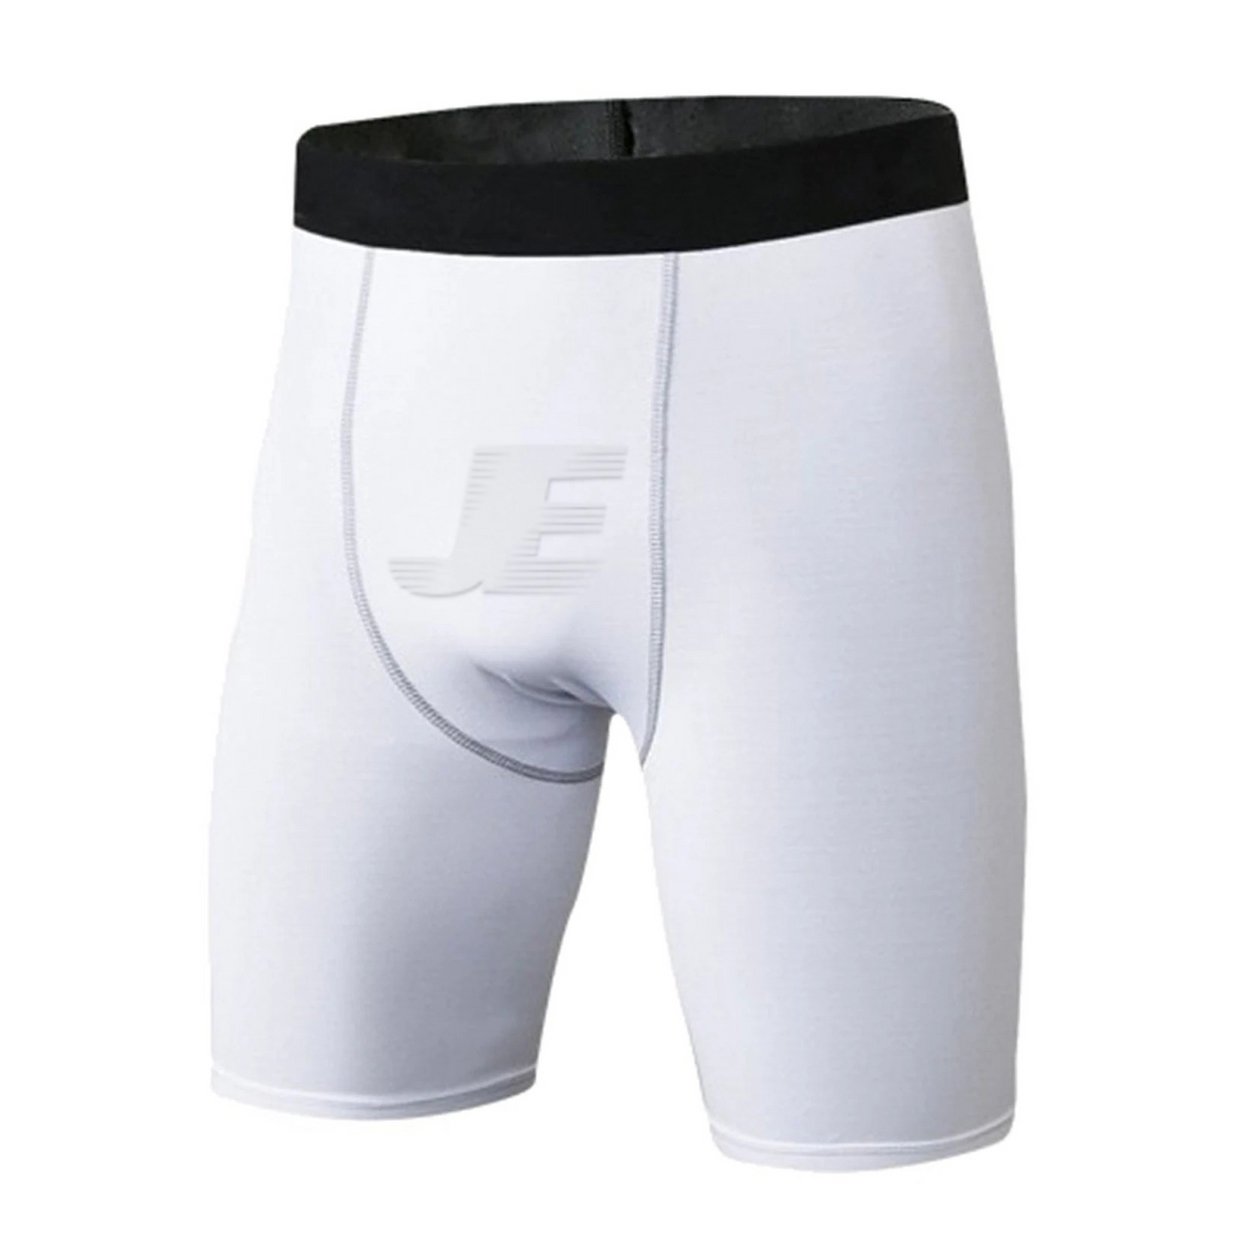 Mens Base Layers White Compression Boxers Briefs Shorts